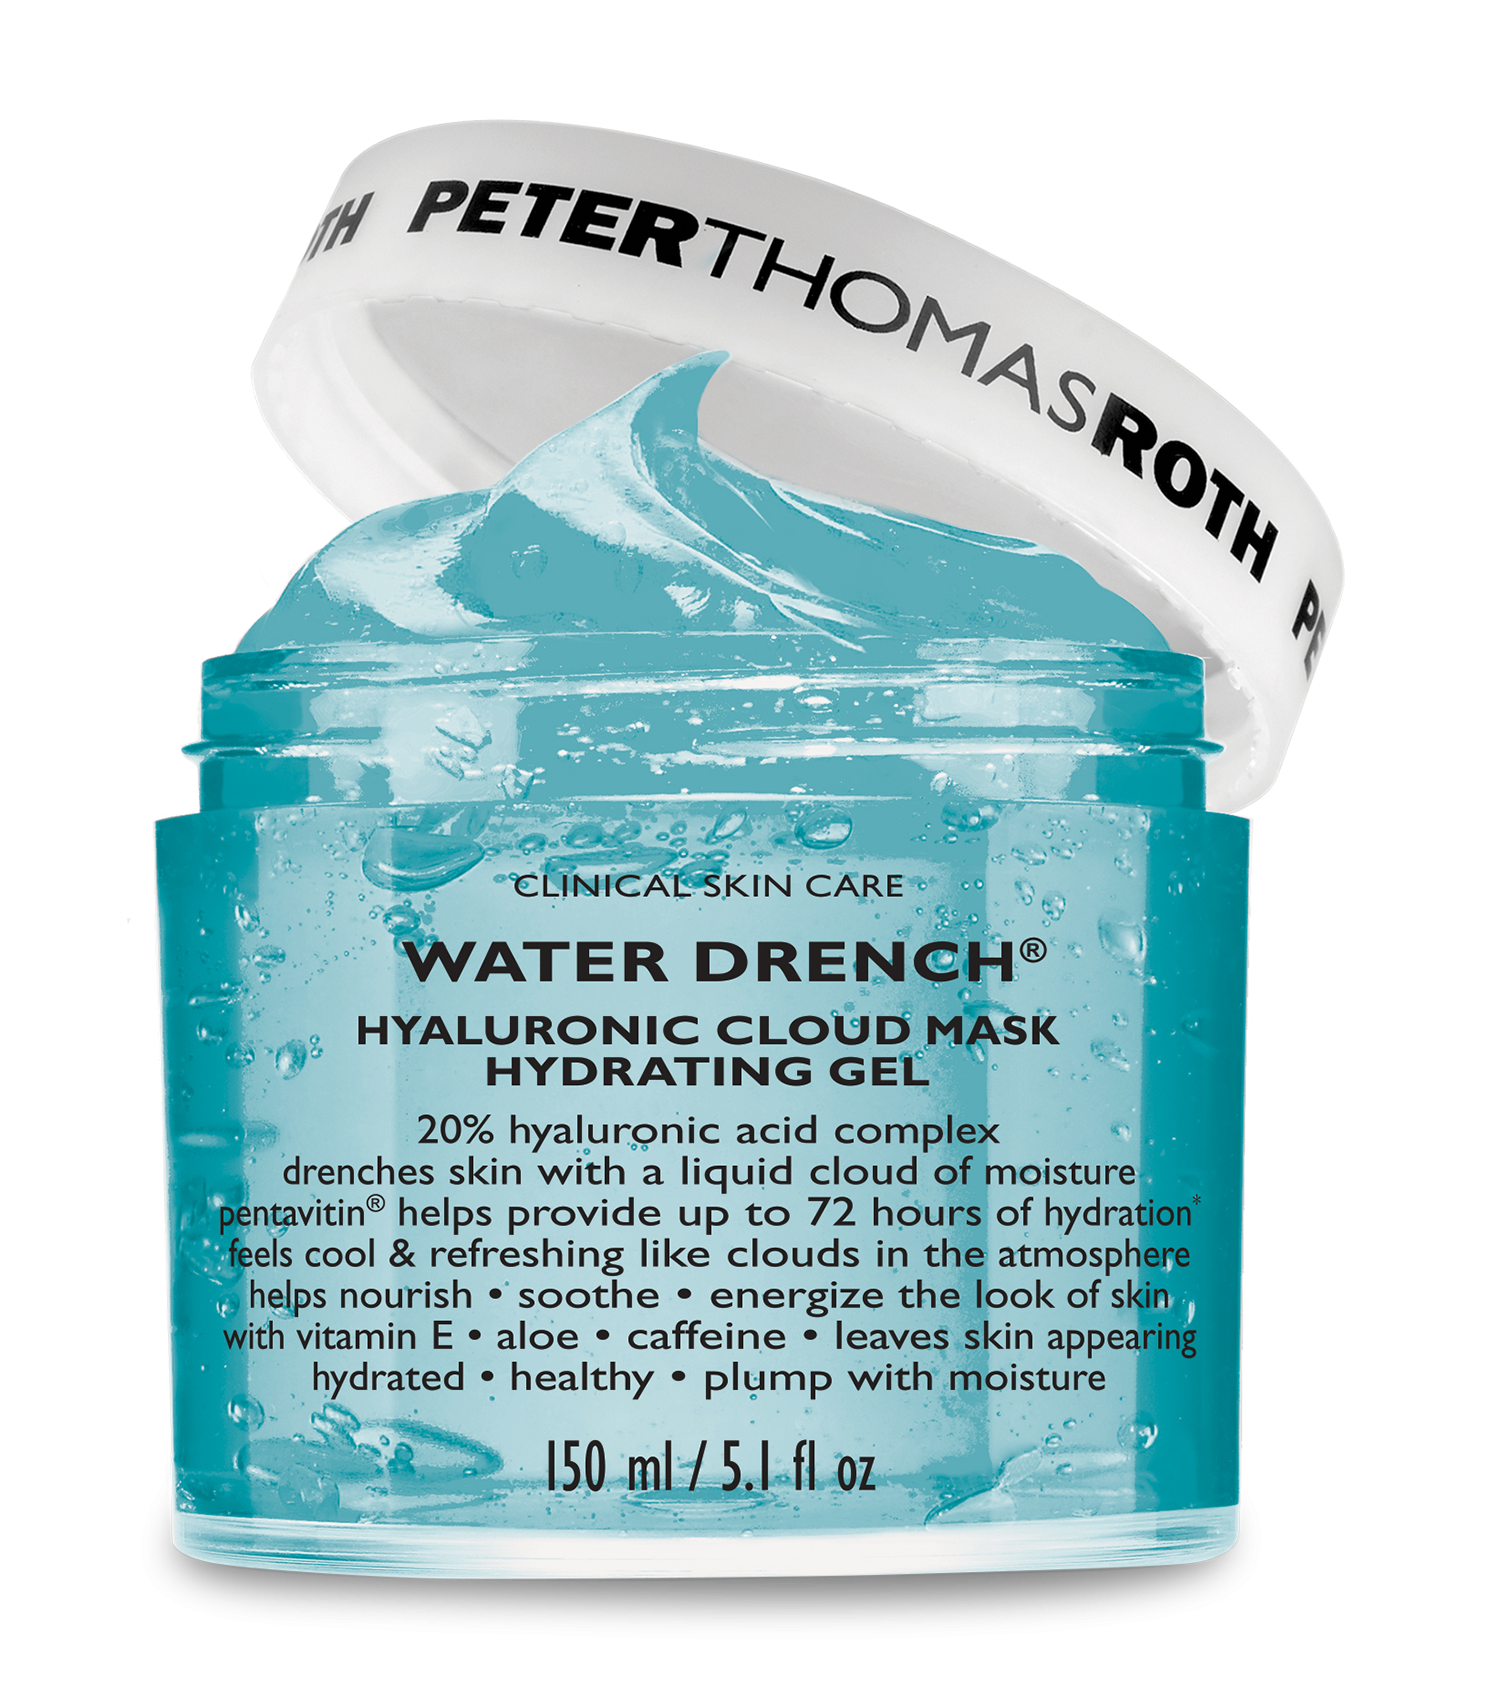 PETER THOMAS ROTH Water Drench Hyaluronic Cloud Mask Hydrating Gel